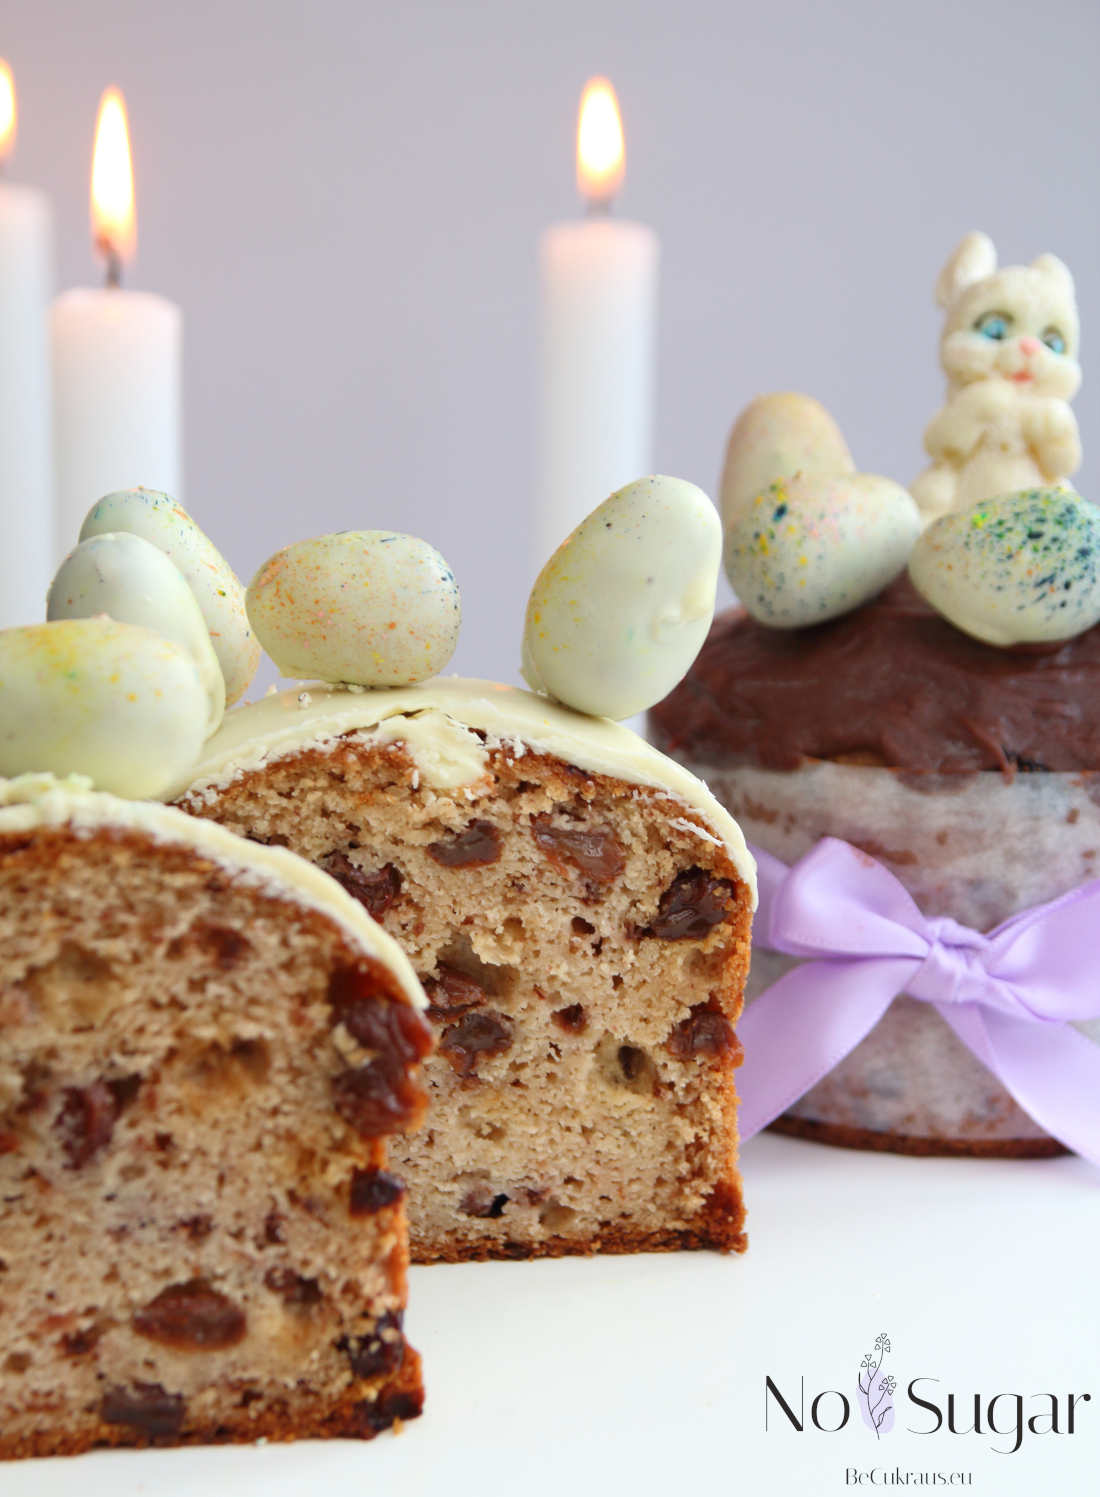 Section of sugar-free and gluten-free Easter cake